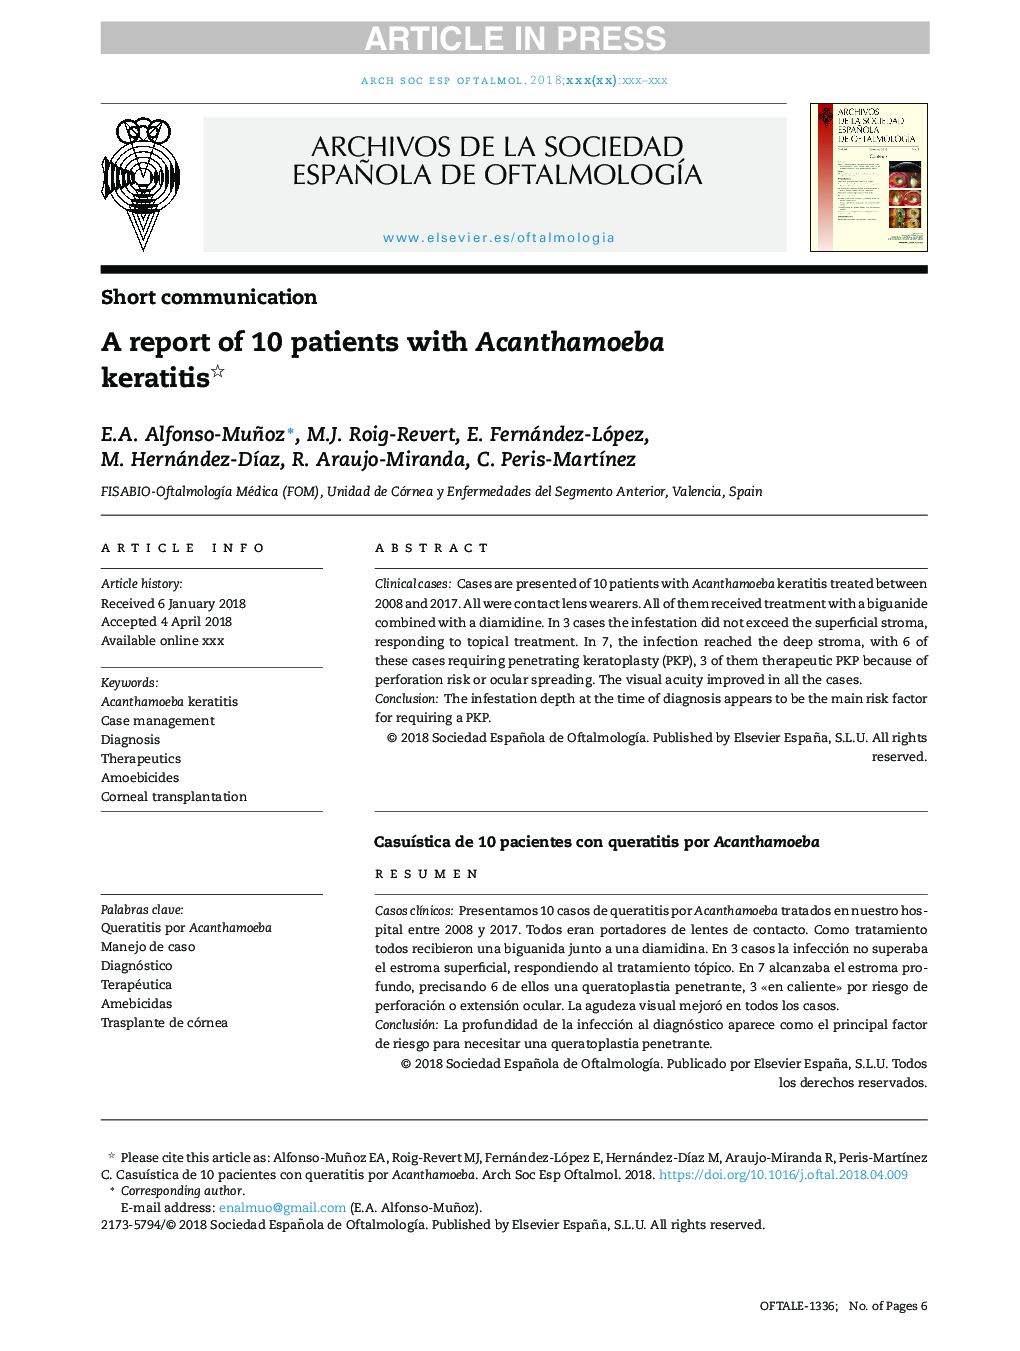 A report of 10 patients with Acanthamoeba keratitis